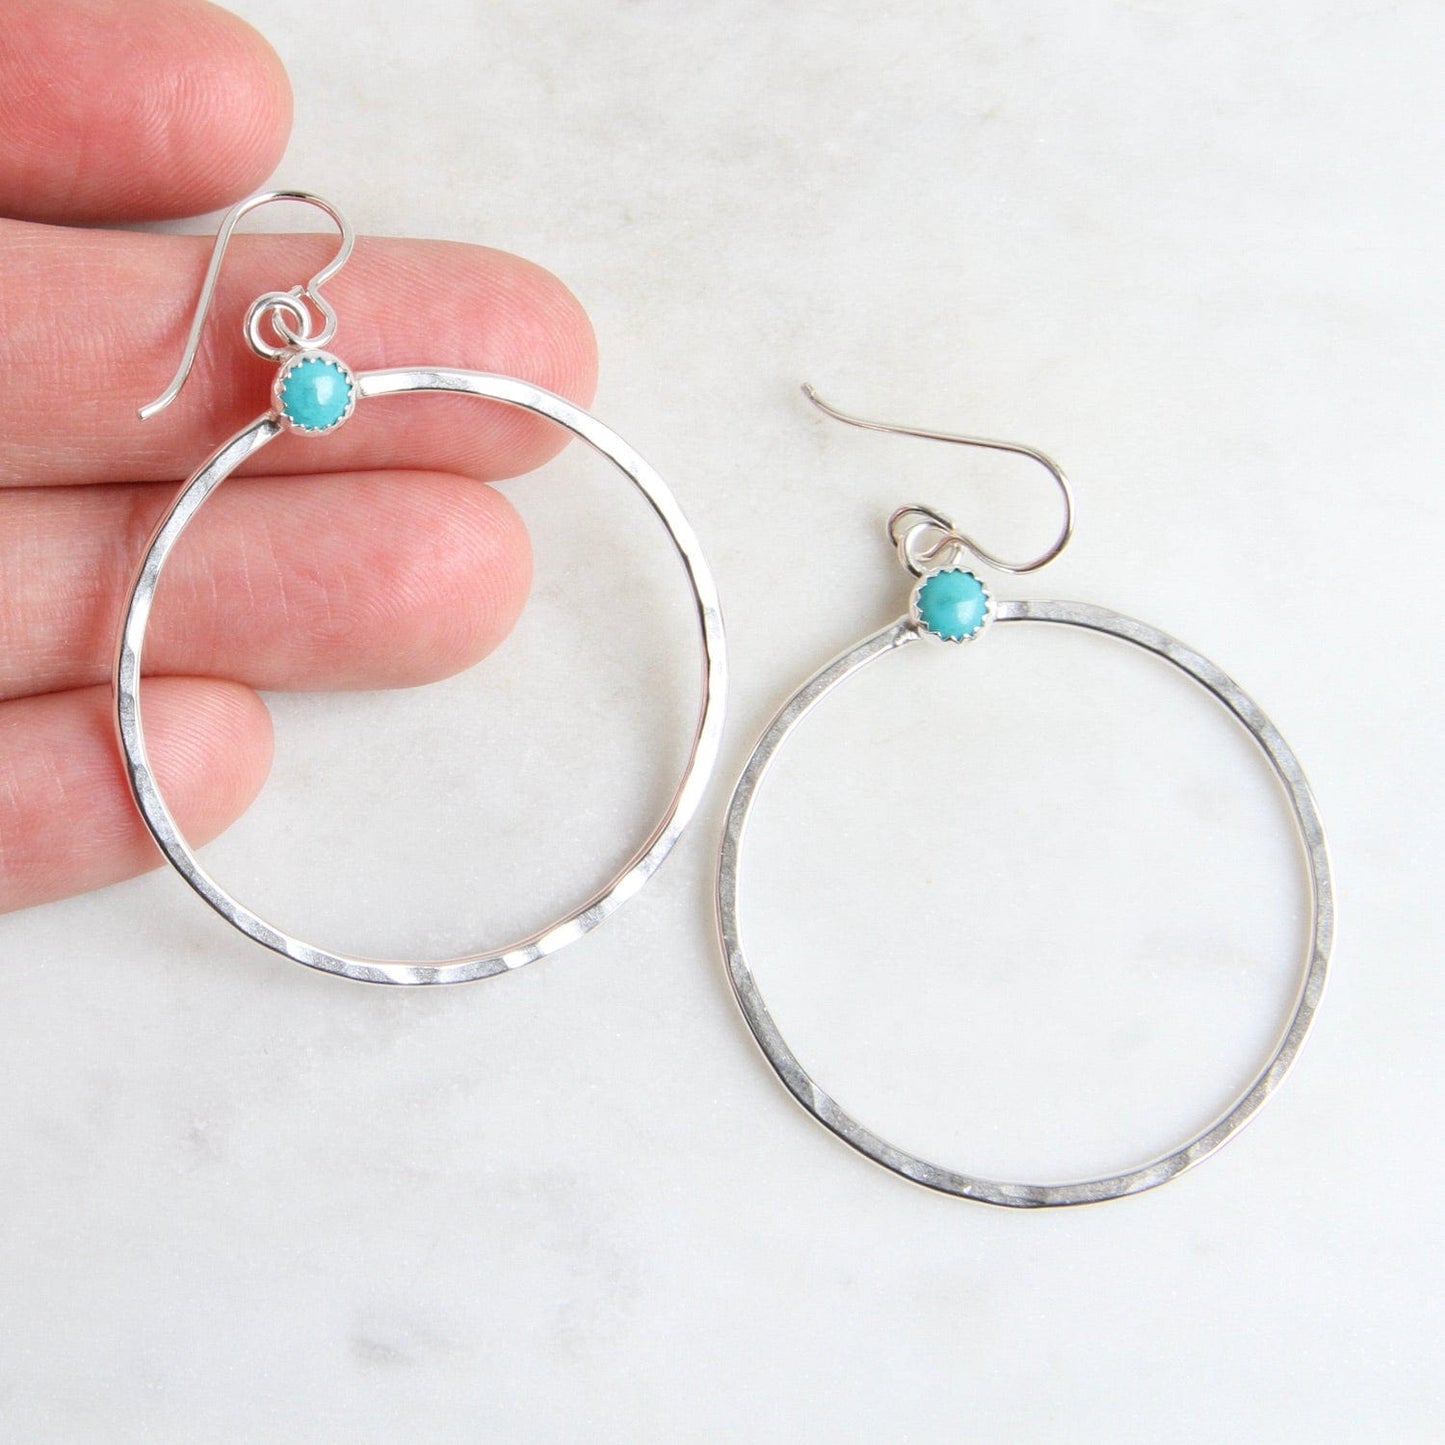 EAR Large Sterling Silver Hoops with Turquoise Earring